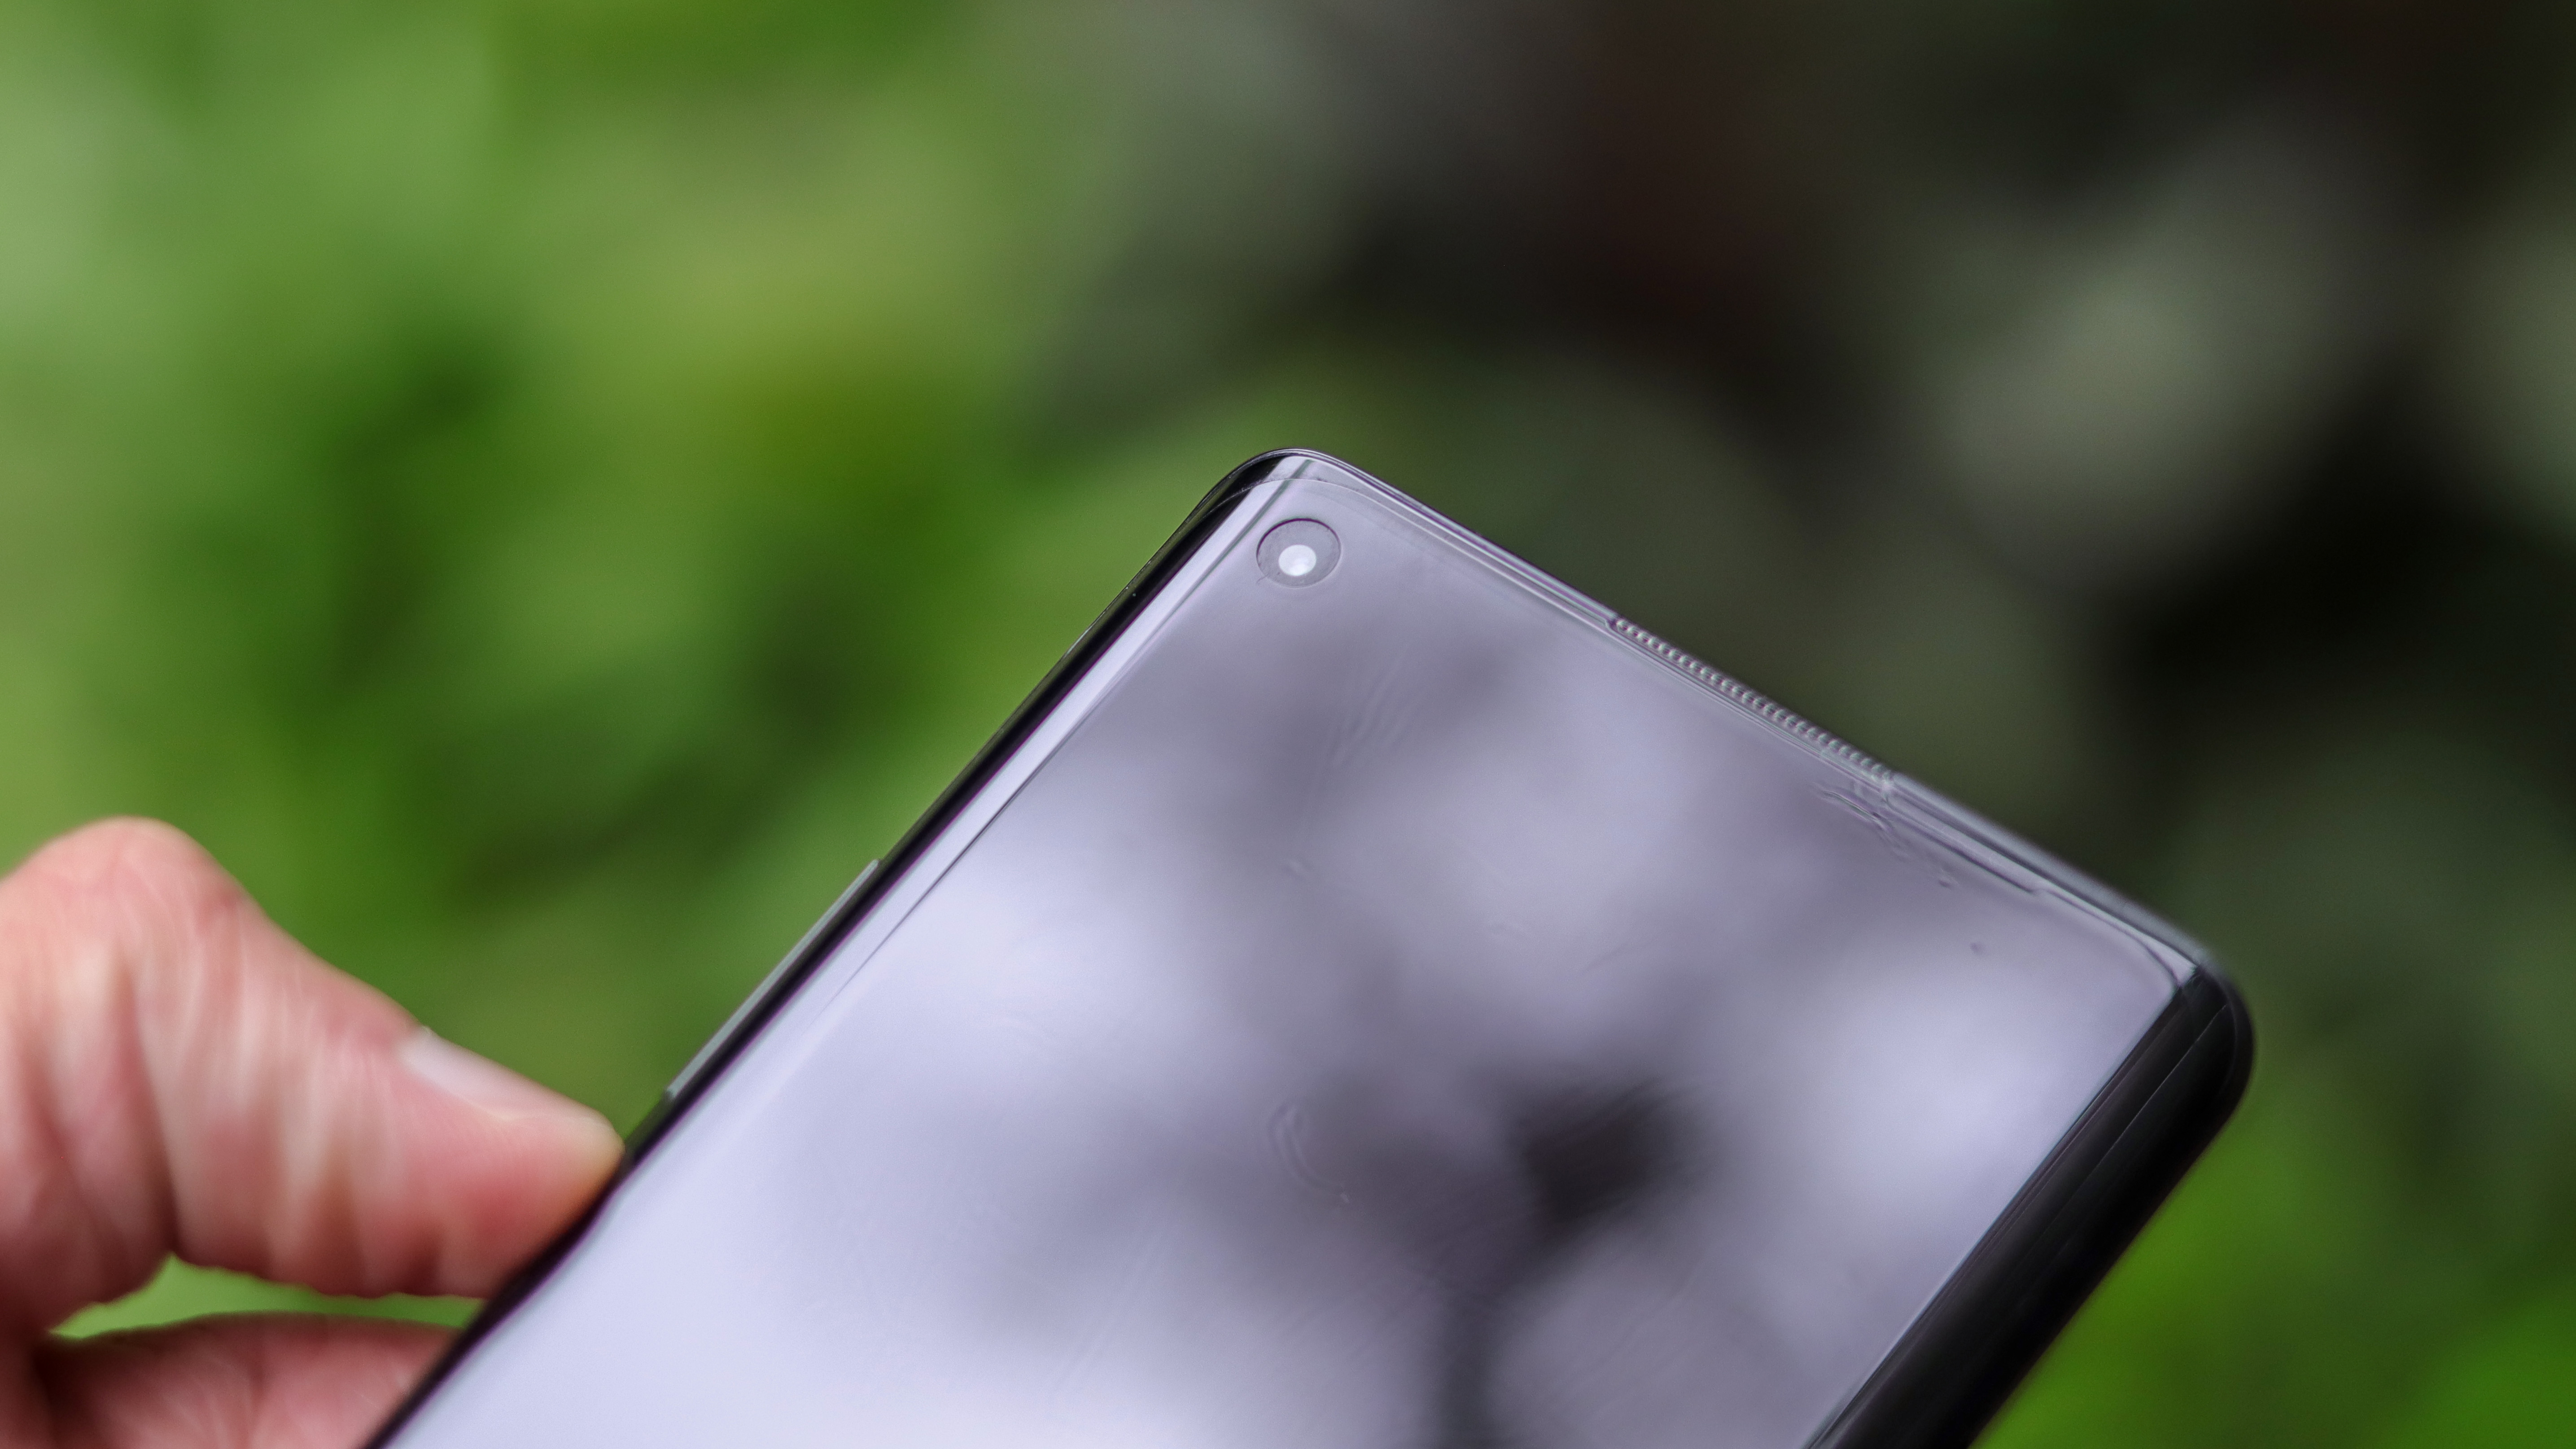 OnePlus Z could have a dual-lens front camera that’s better than the OnePlus 8’s